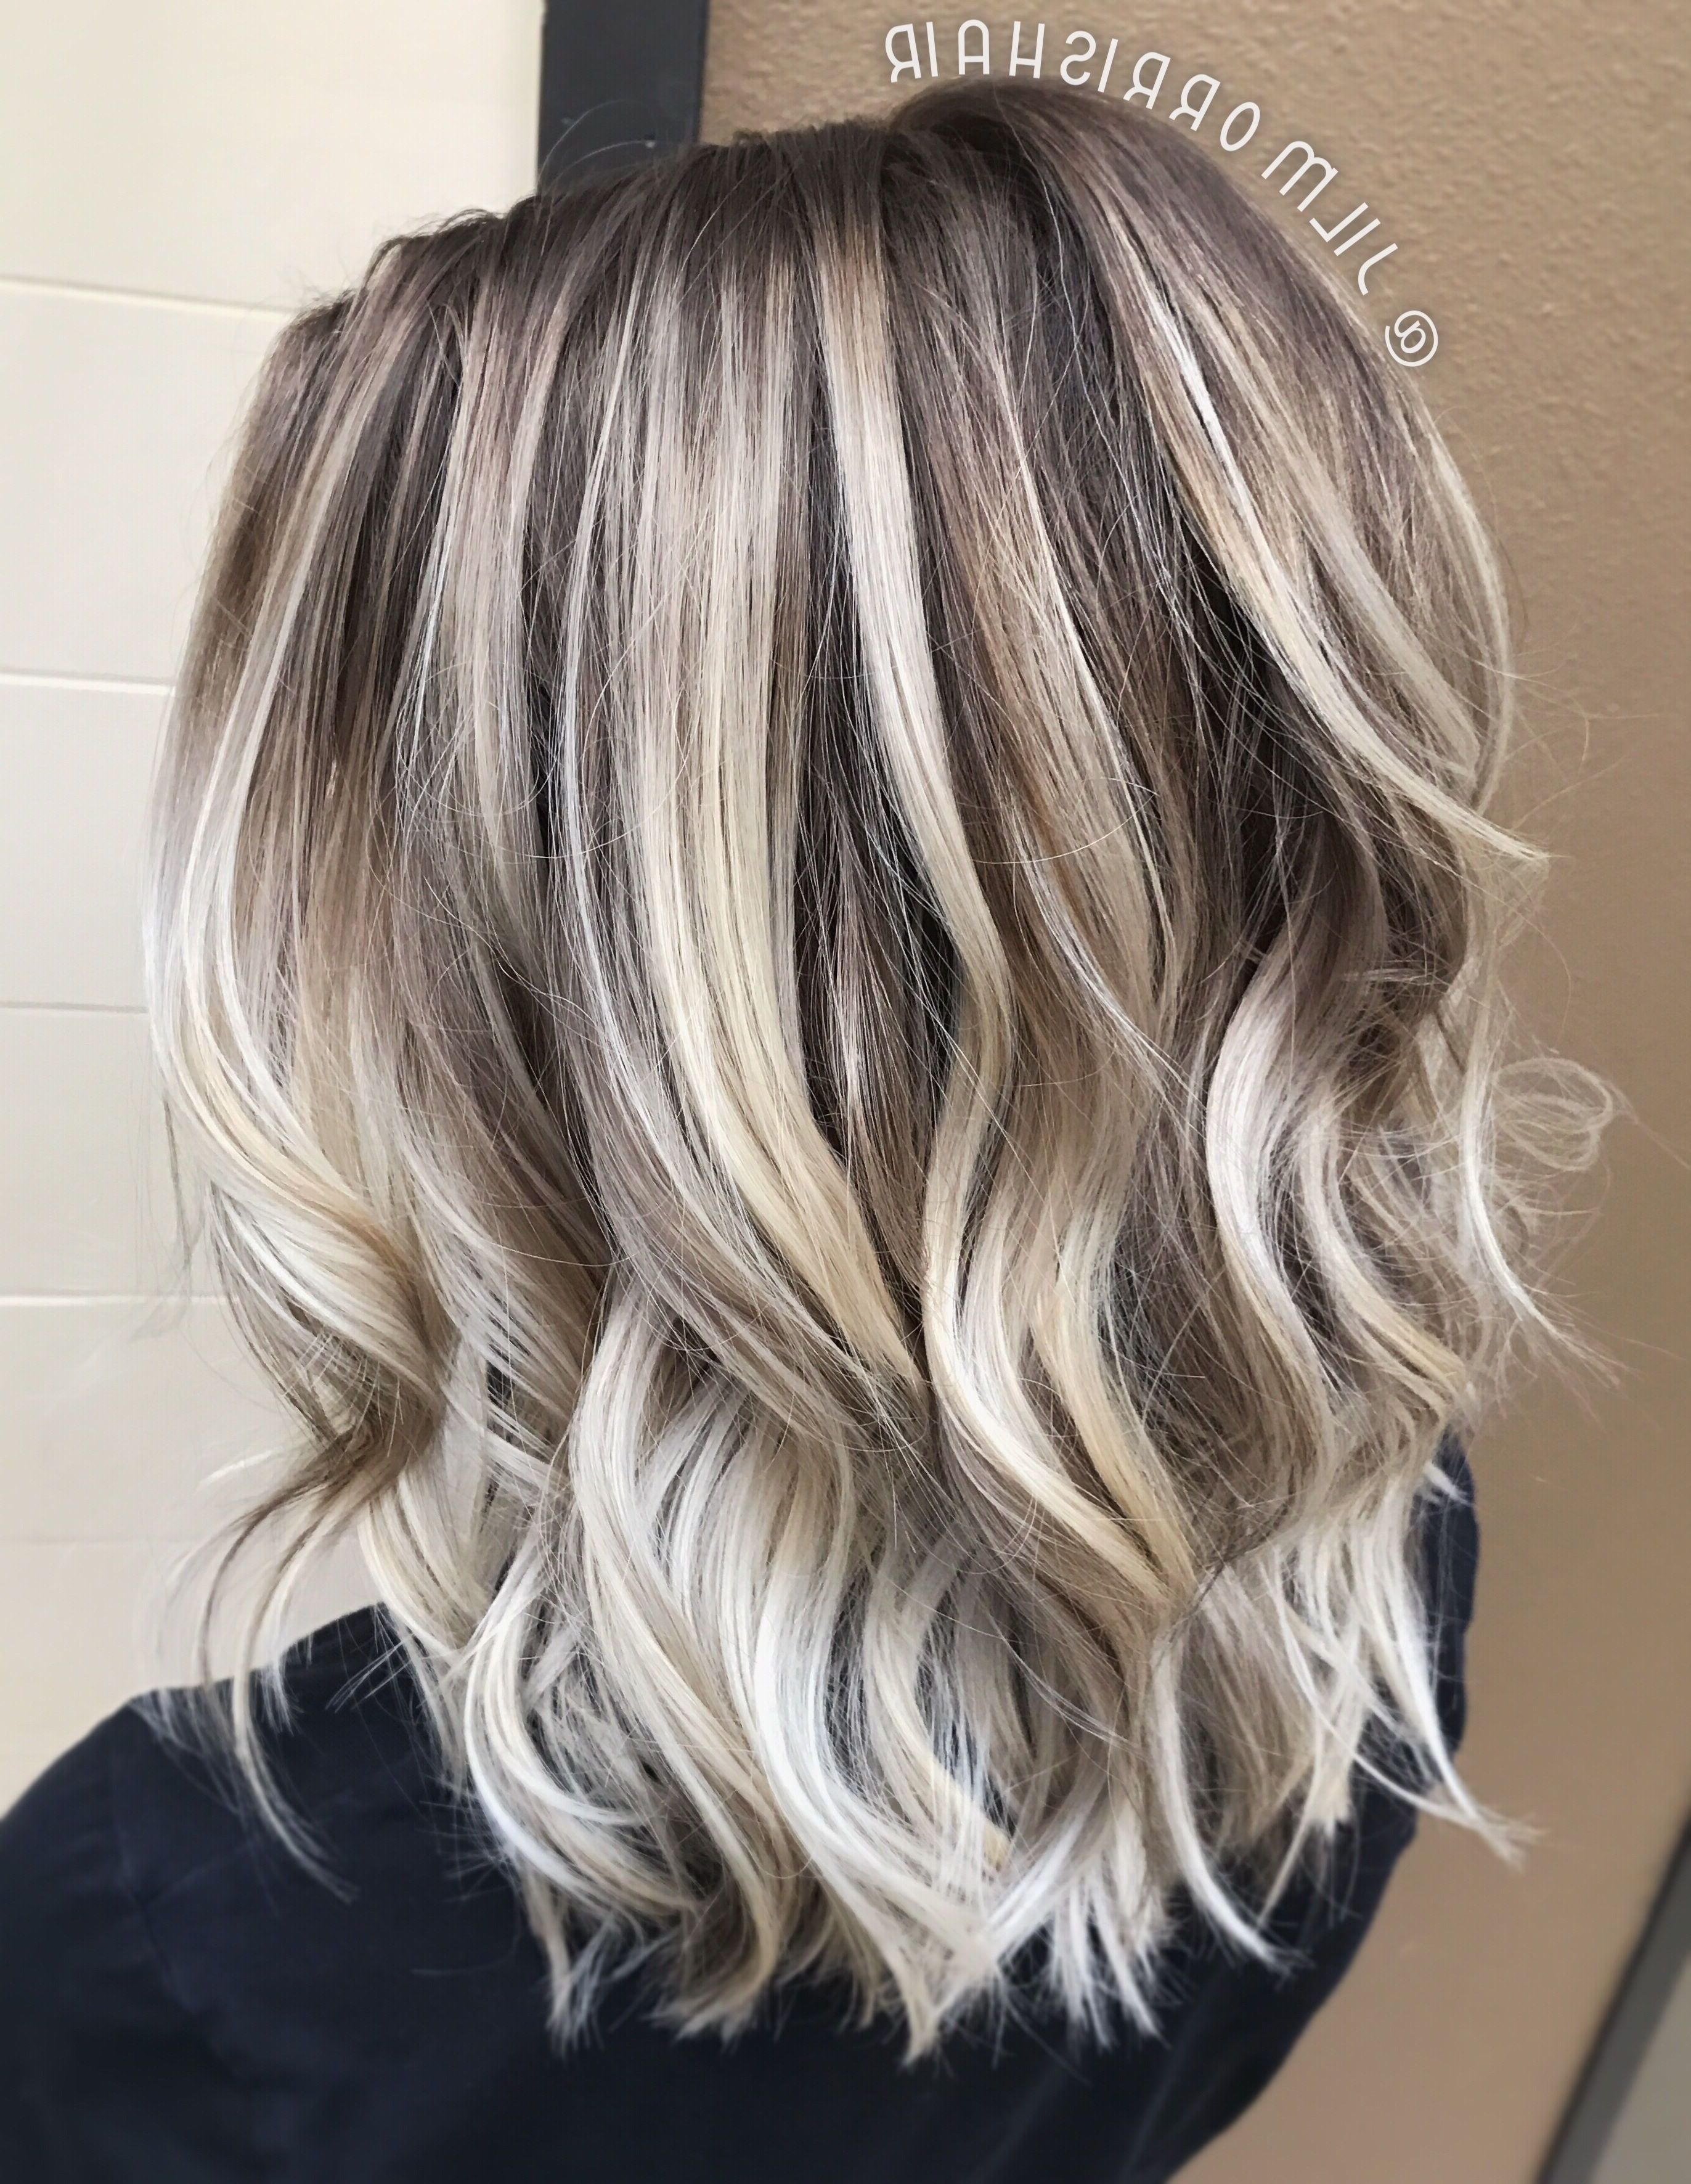 Cool Icy Ashy Blonde Balayage Highlights, Shadow Root, Waves And For Famous Ashy Blonde Pixie Hairstyles With A Messy Touch (View 1 of 20)